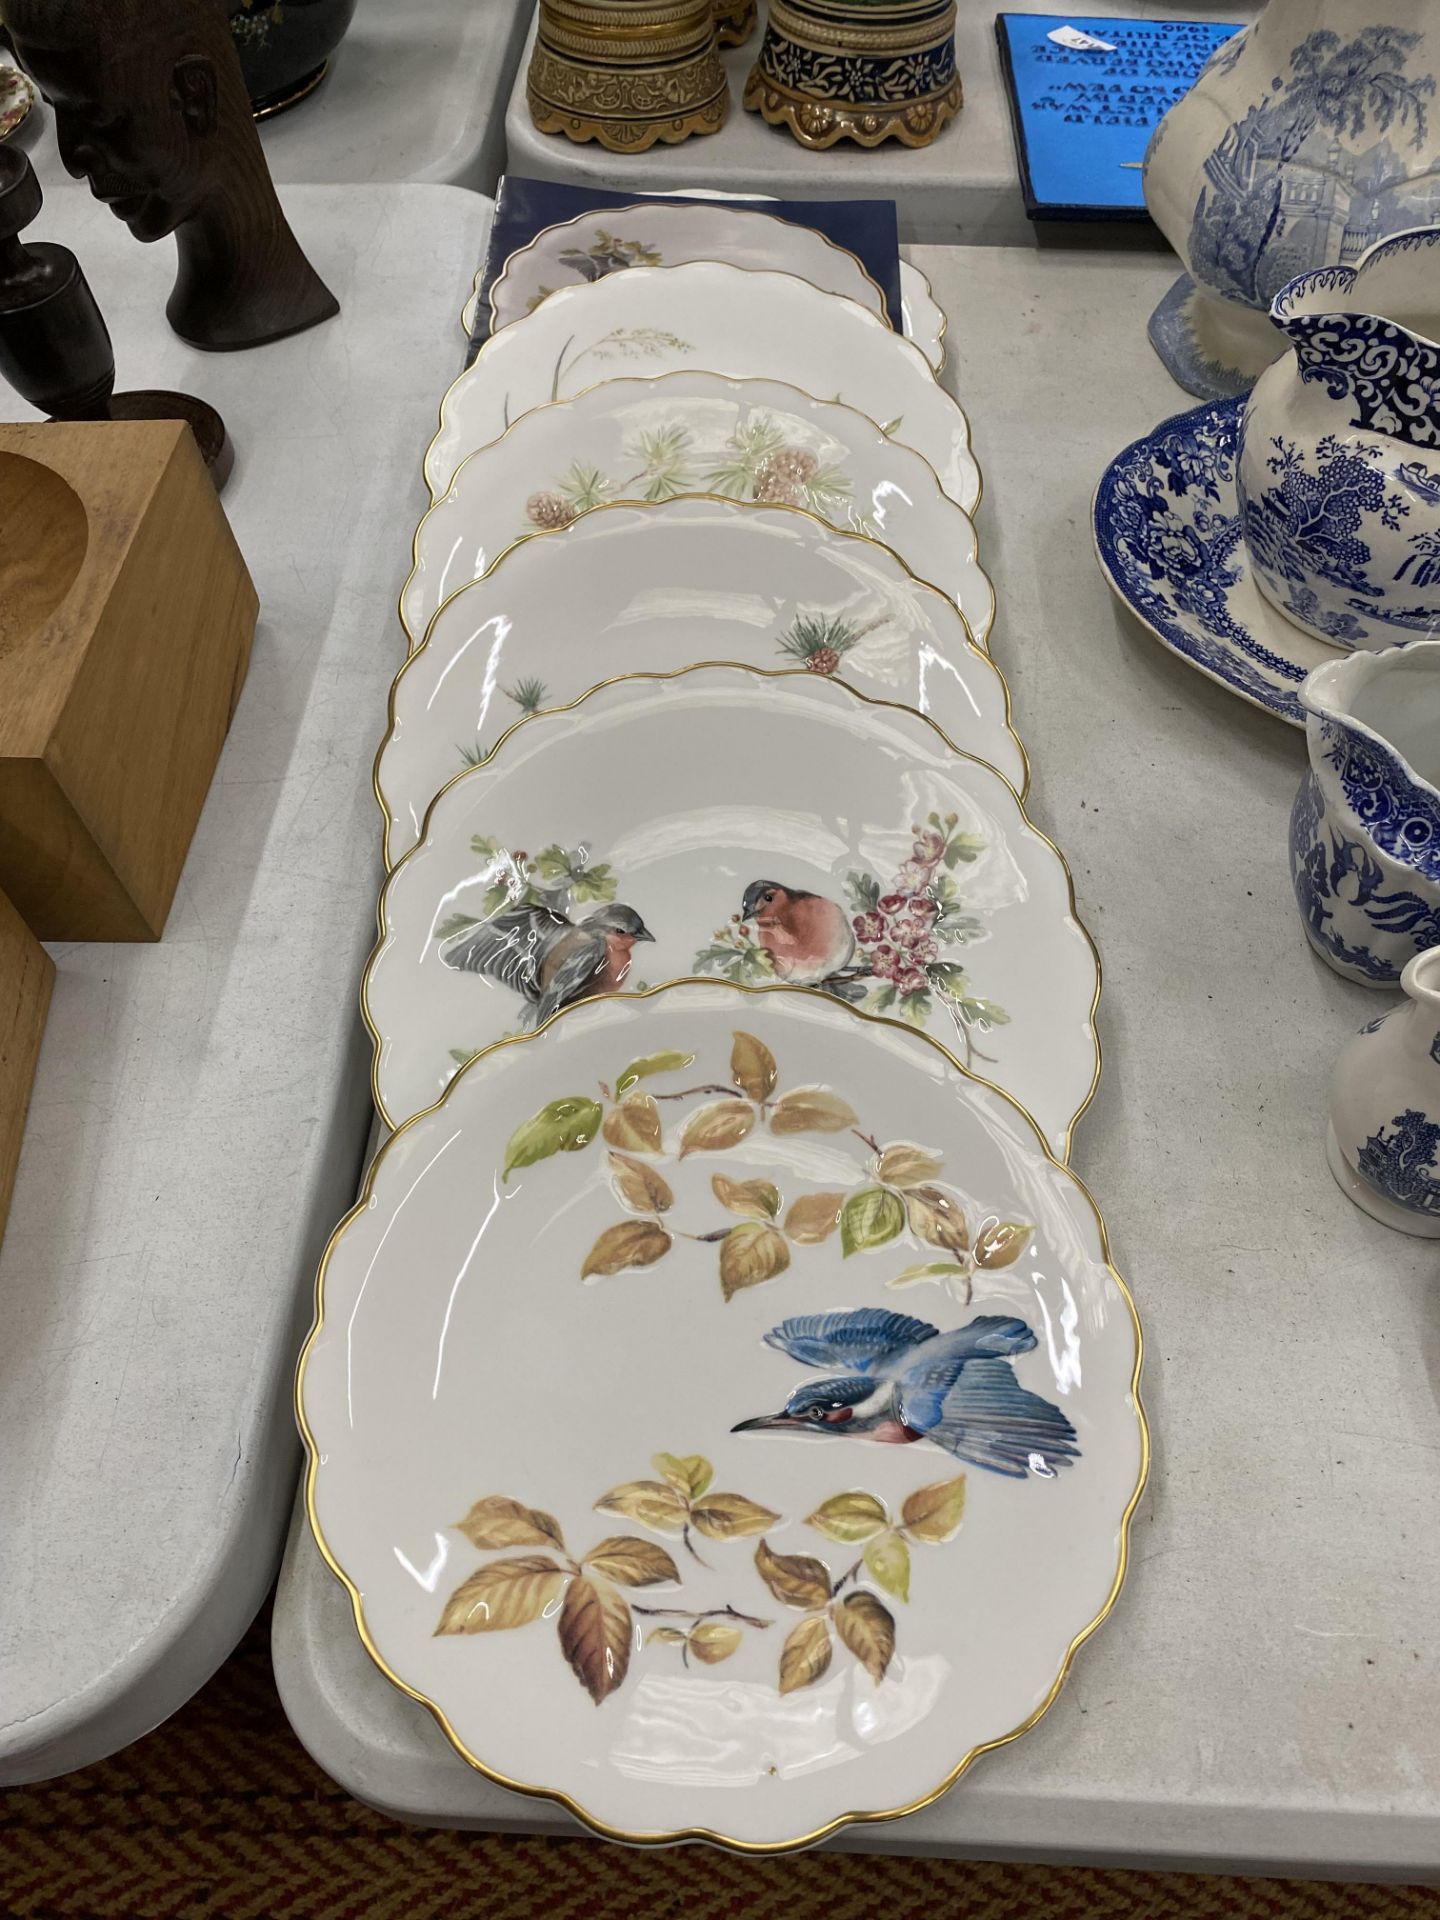 SIX COLLECTABLE 'THE BIRDS OF DOROTHY DOUGHTY DESSERT PLATES' TO INCLUDE KINGFISHER, ROBIN, ETC